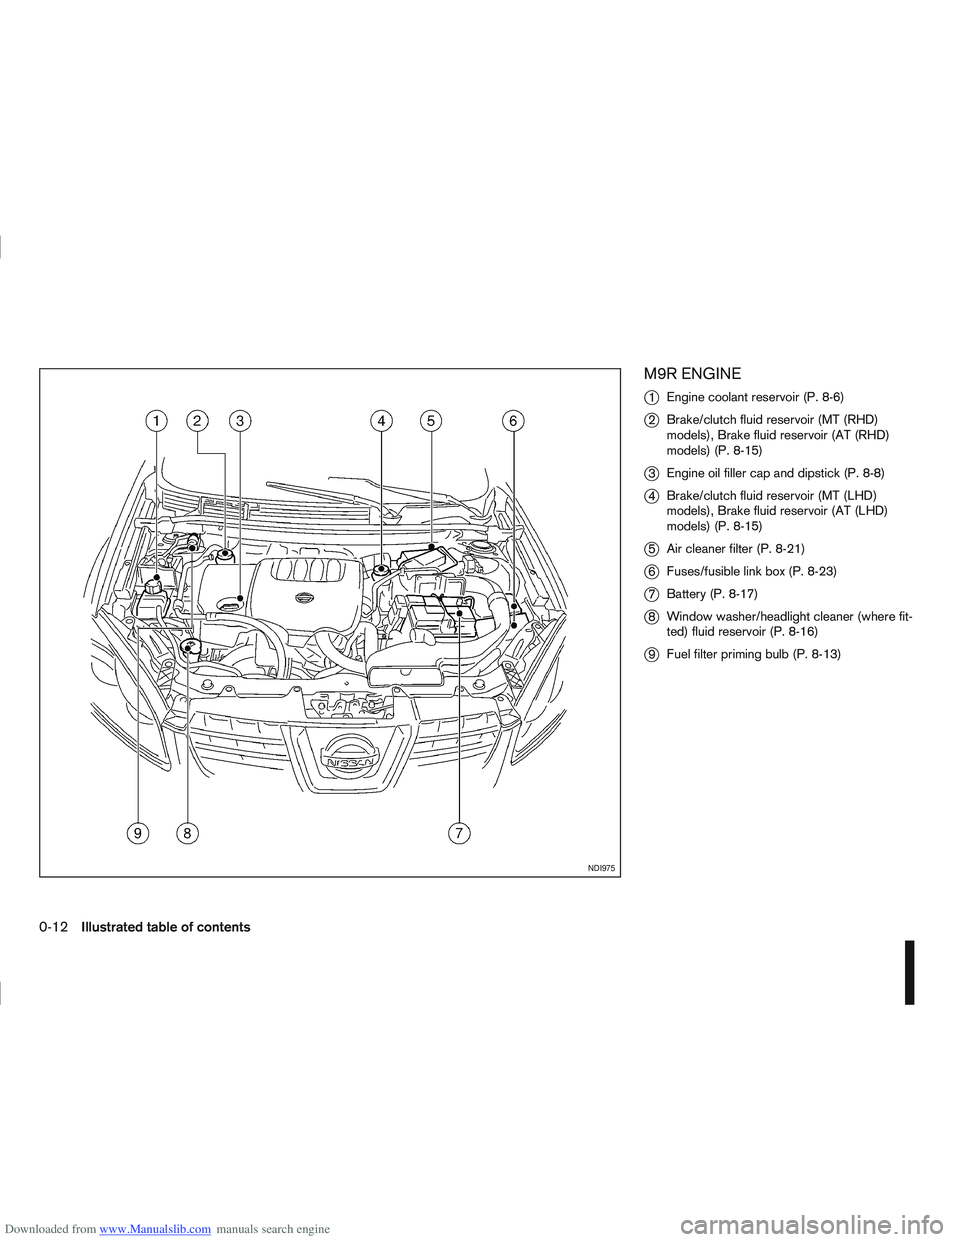 NISSAN QASHQAI 2007  Owners Manual Downloaded from www.Manualslib.com manuals search engine M9R ENGINE
j
1Engine coolant reservoir (P. 8-6)
j2Brake/clutch fluid reservoir (MT (RHD)
models), Brake fluid reservoir (AT (RHD)
models) (P. 8